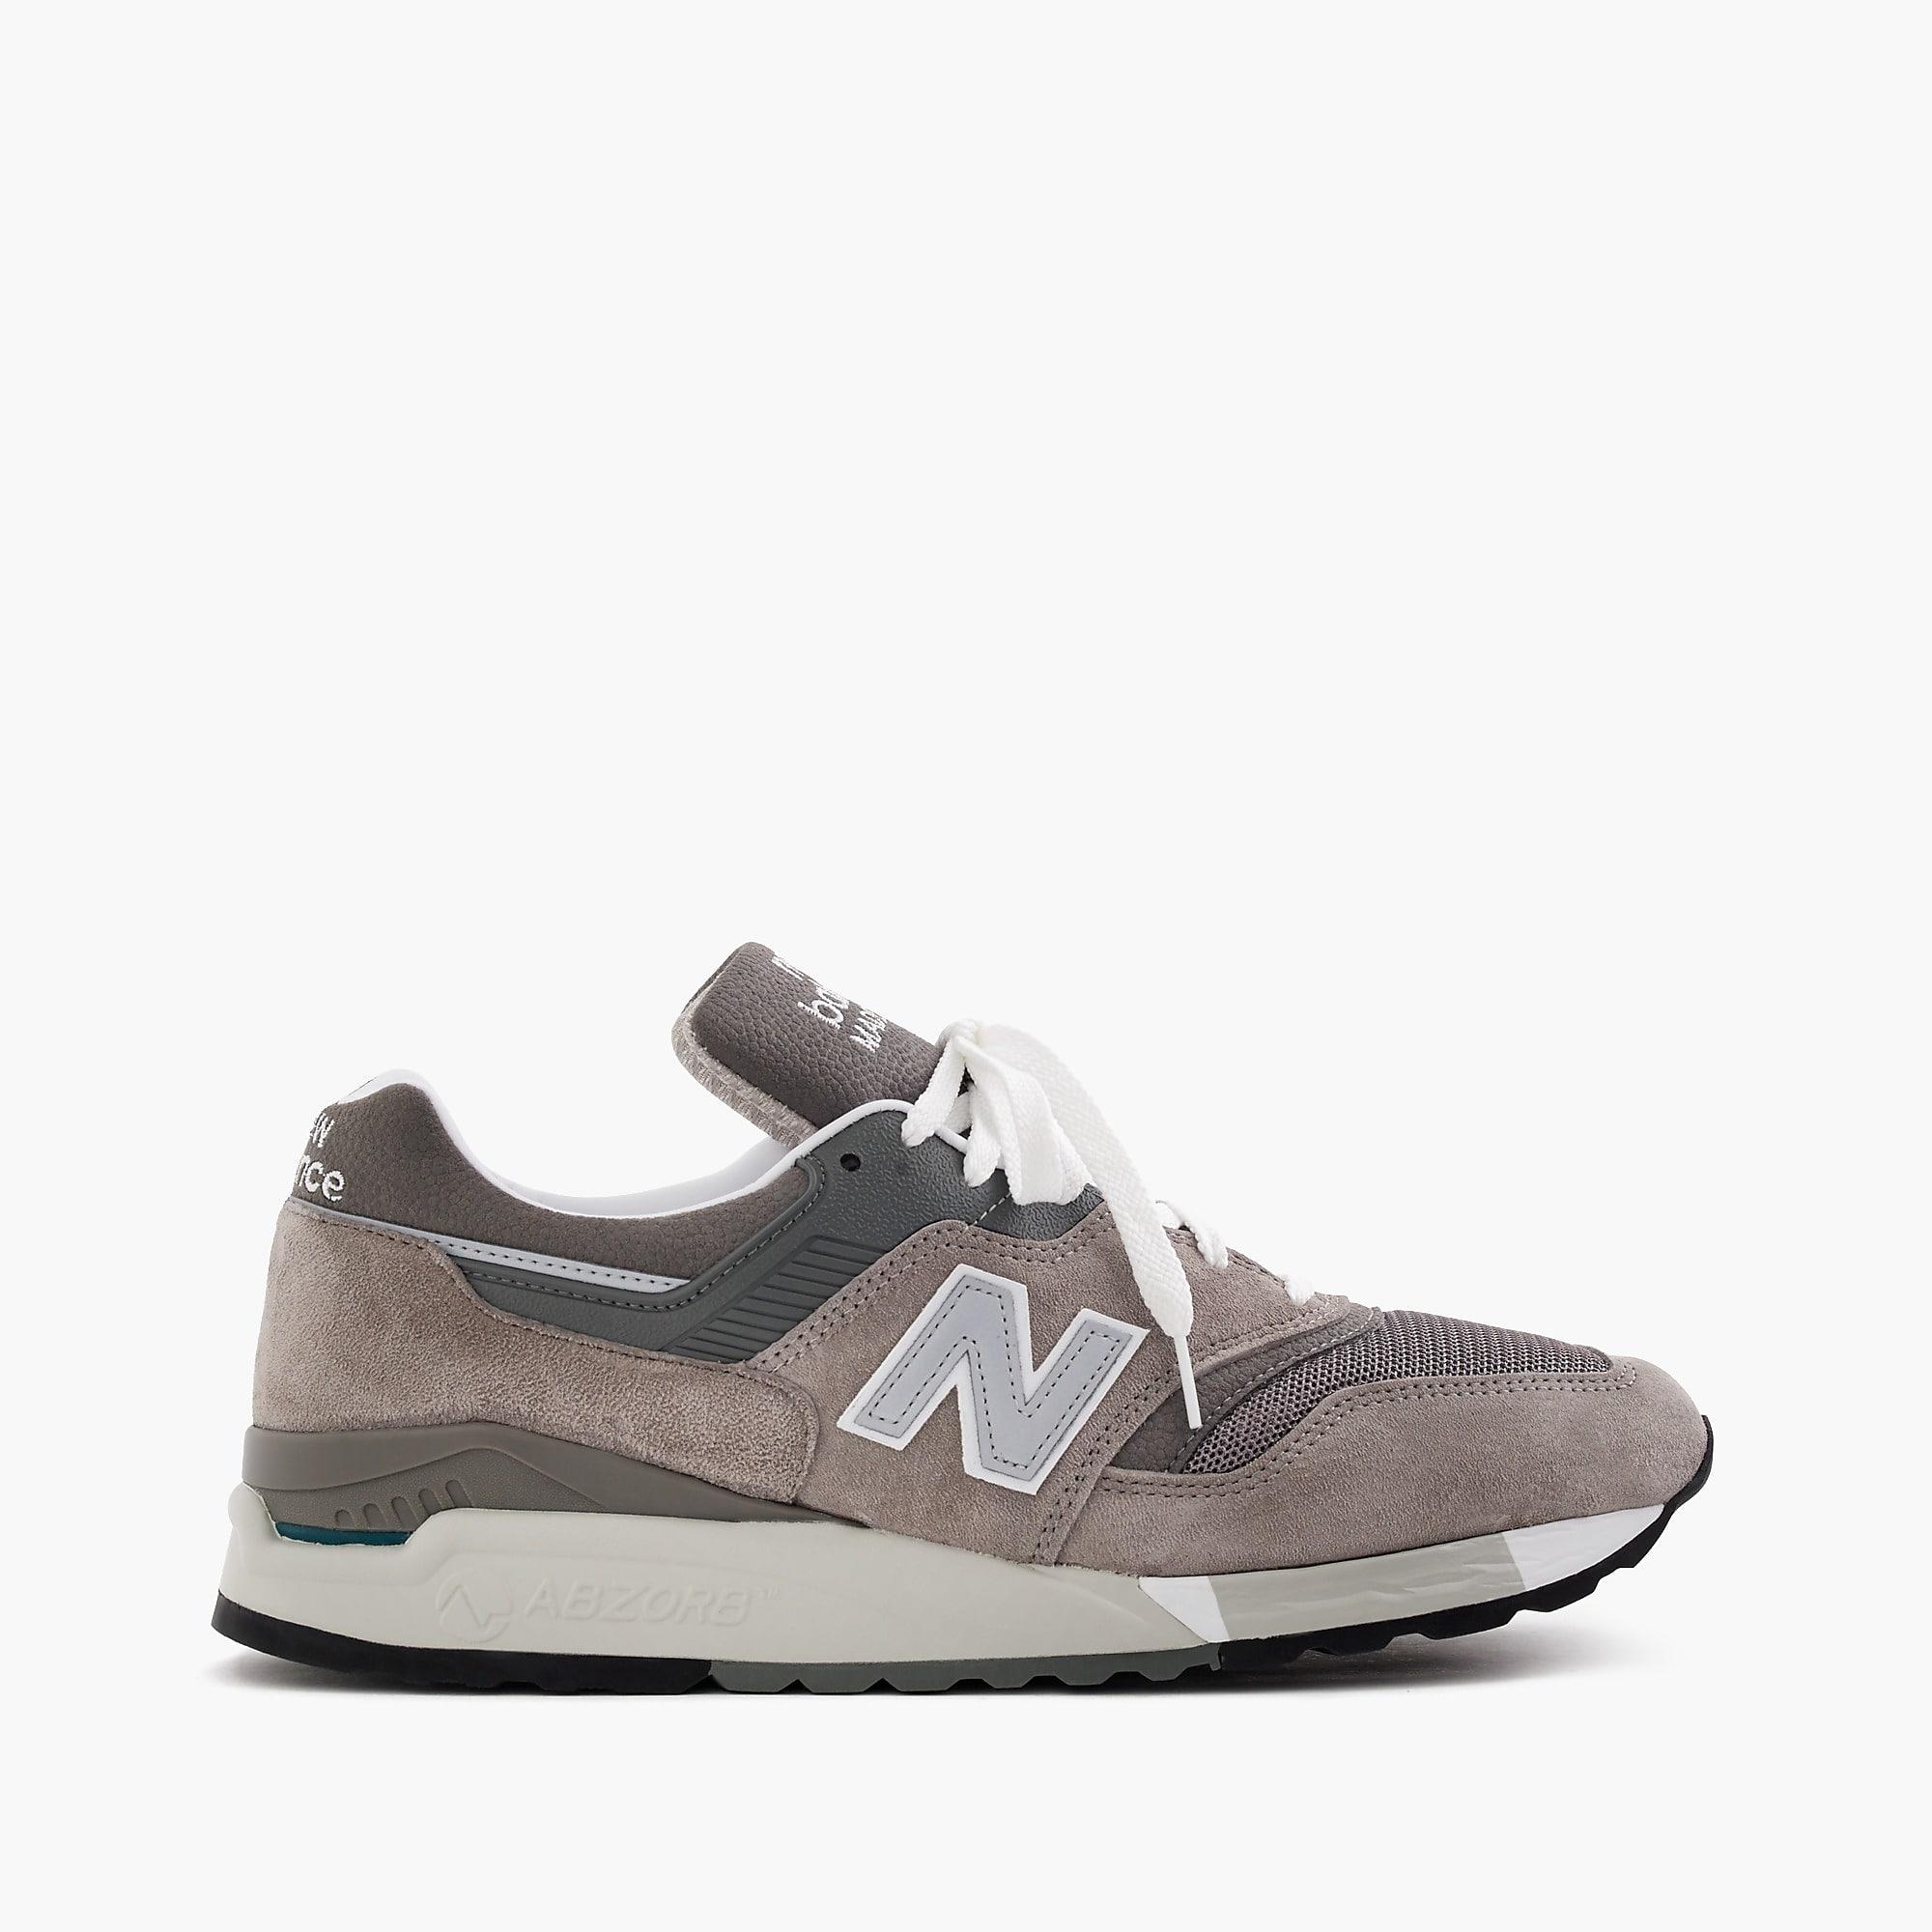 New Balance Suede 997.5 Sneakers in Grey (Gray) for Men - Lyst